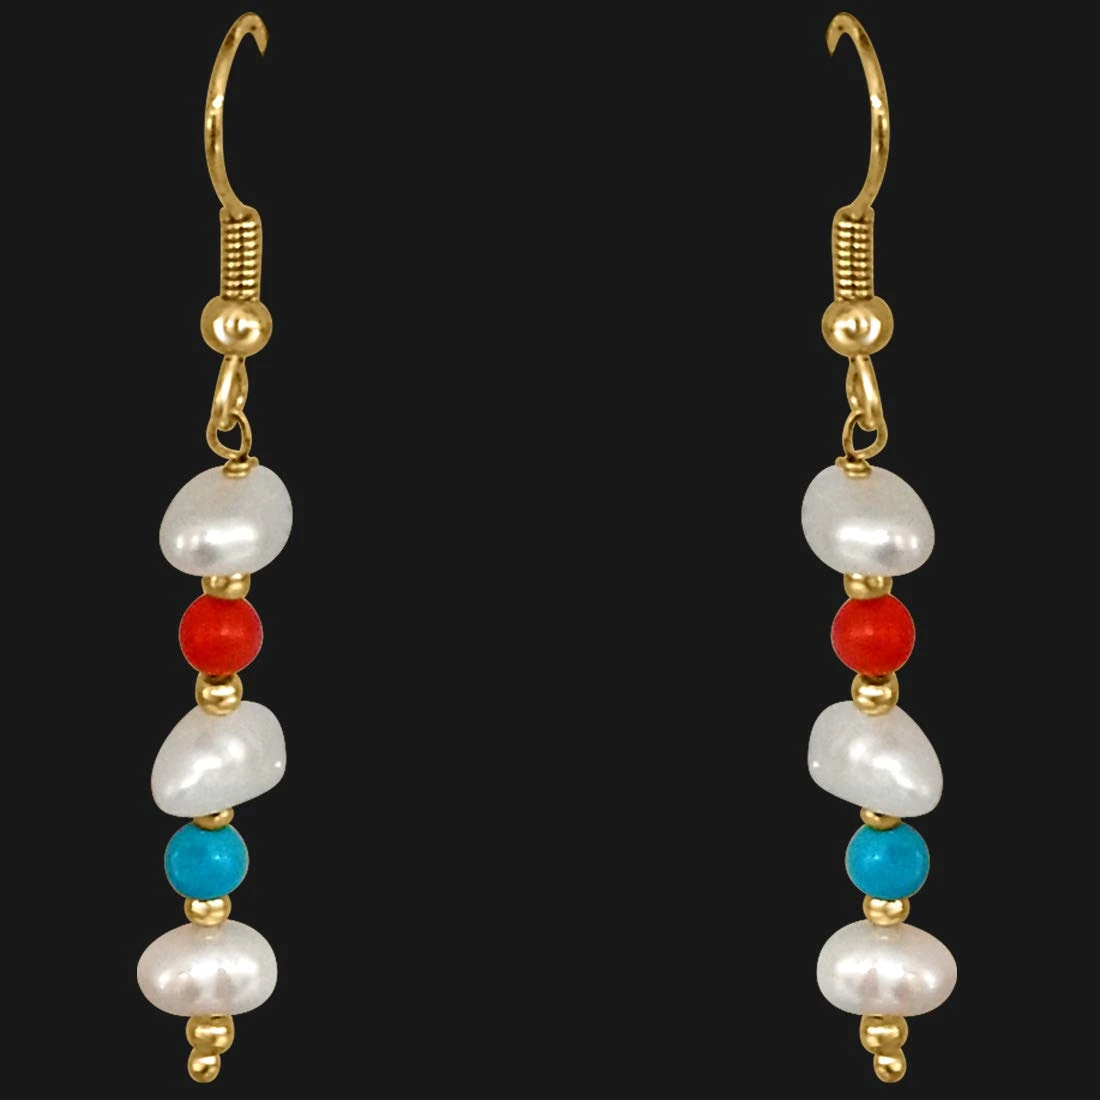 Real Coral, Turquoise & Freshwater Pearl Earring for Women (SE205)